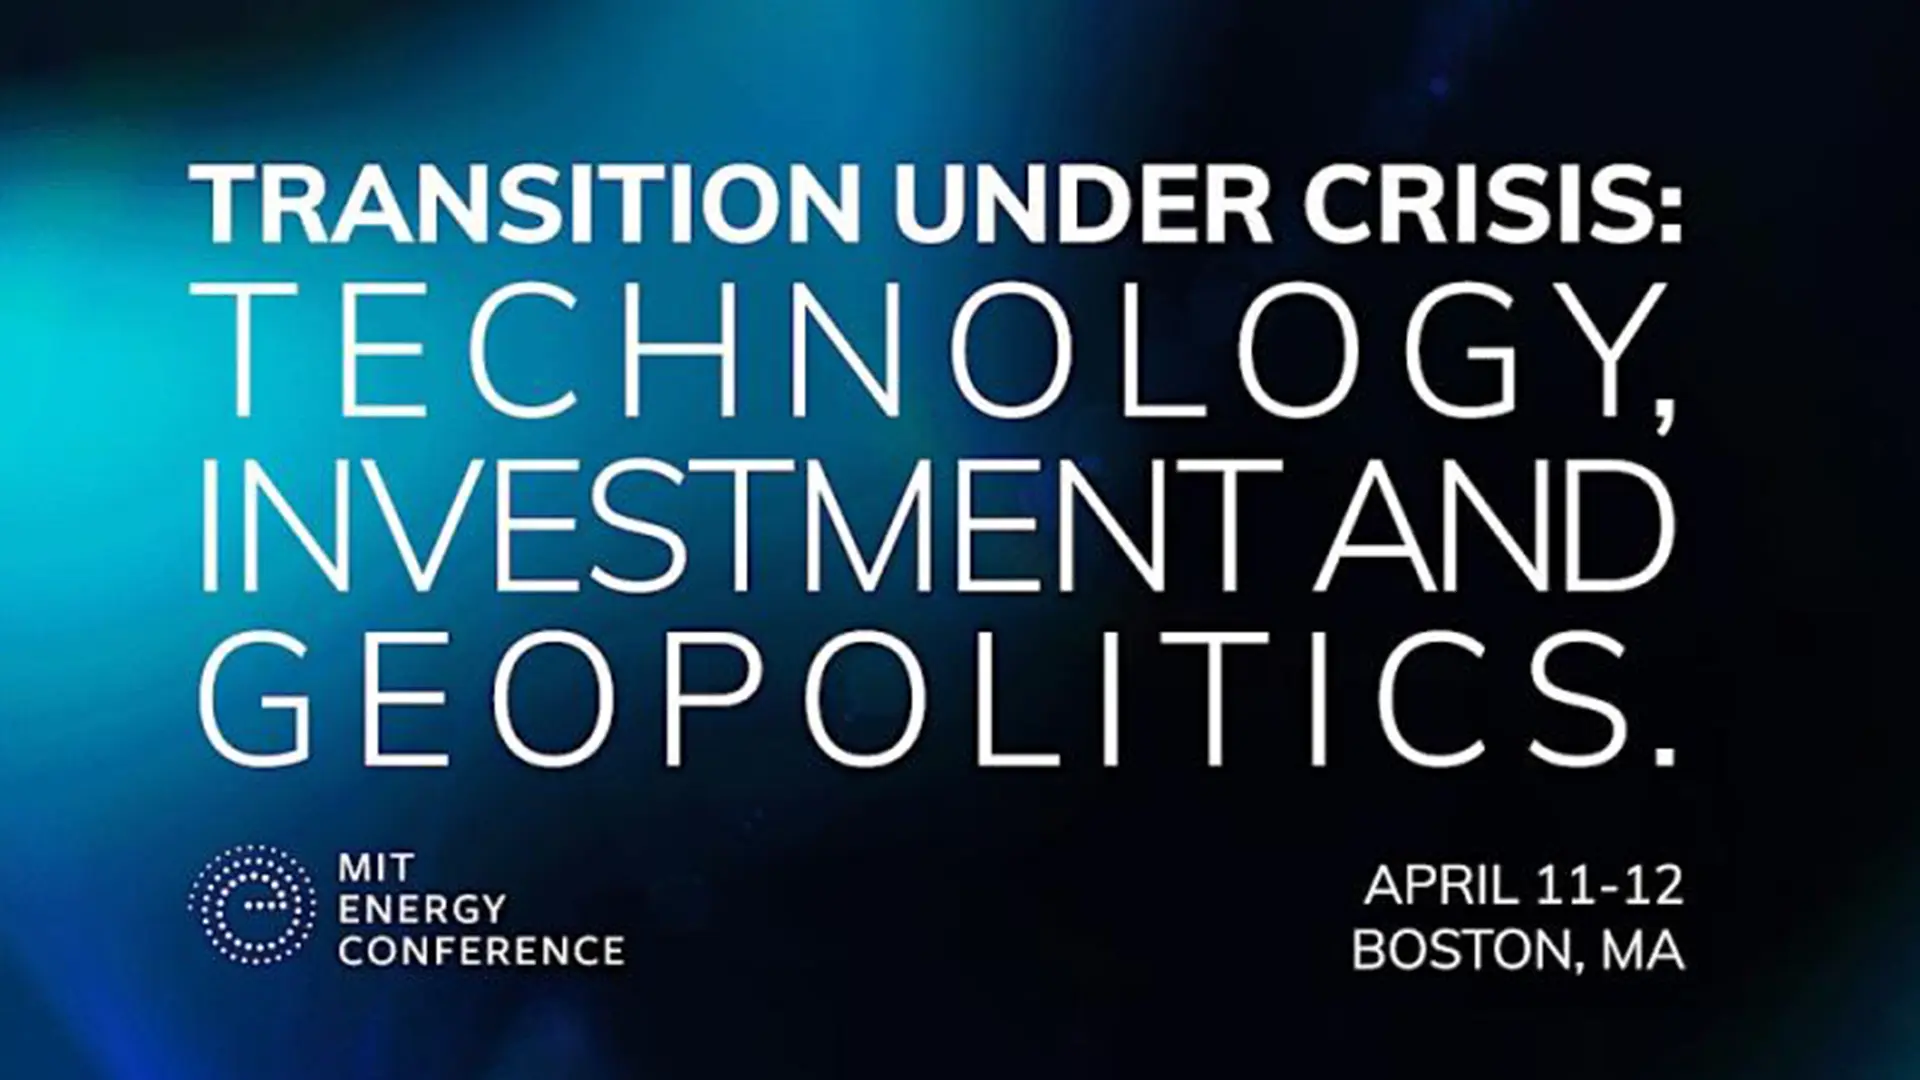 Sample of the MIT Energy Conference banner.